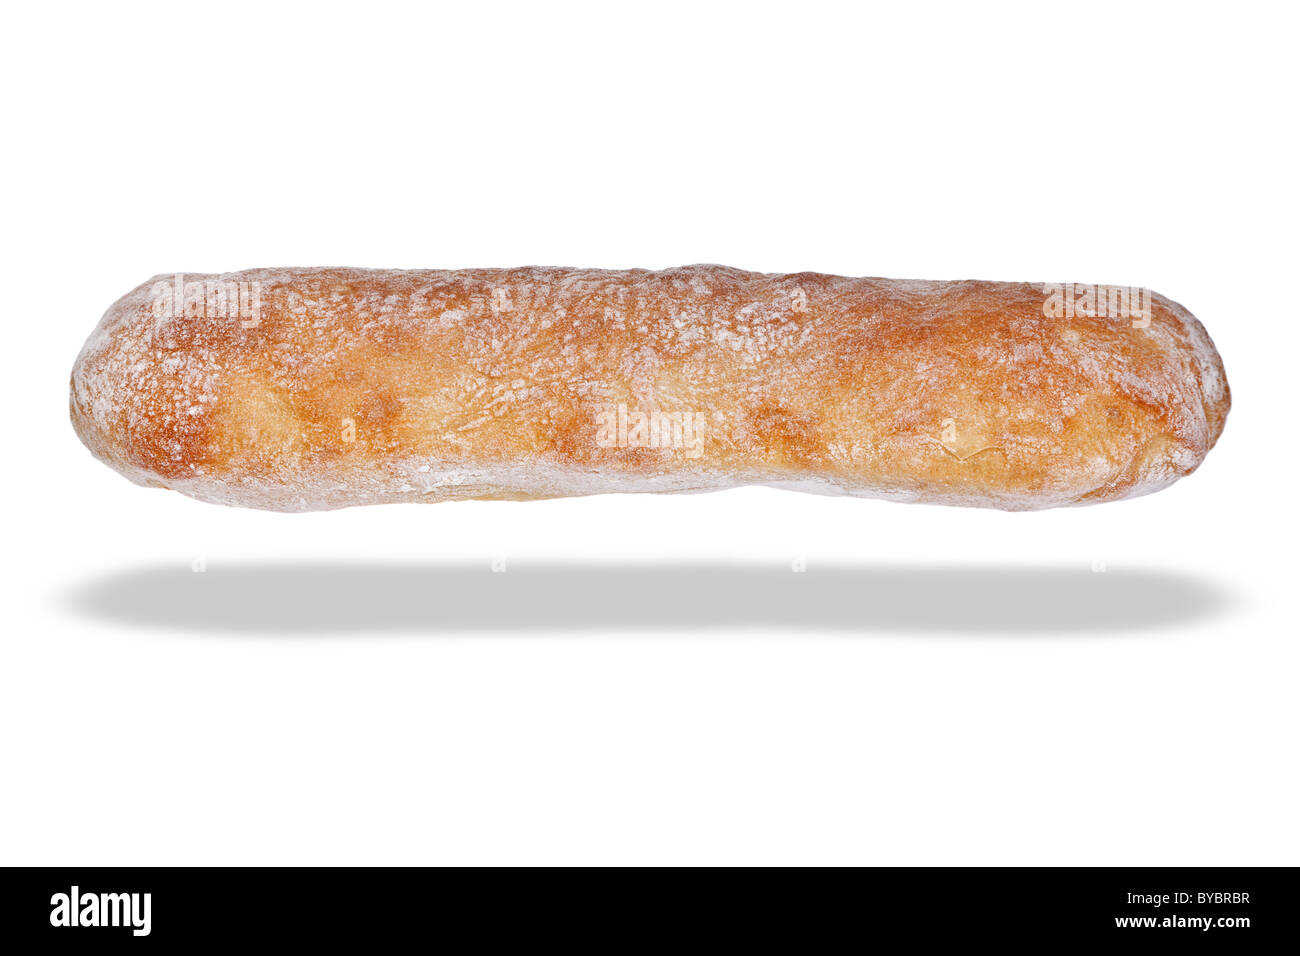 Photo of a Ciabatta loaf of bread, isolated on a white background with floating shadow. Stock Photo